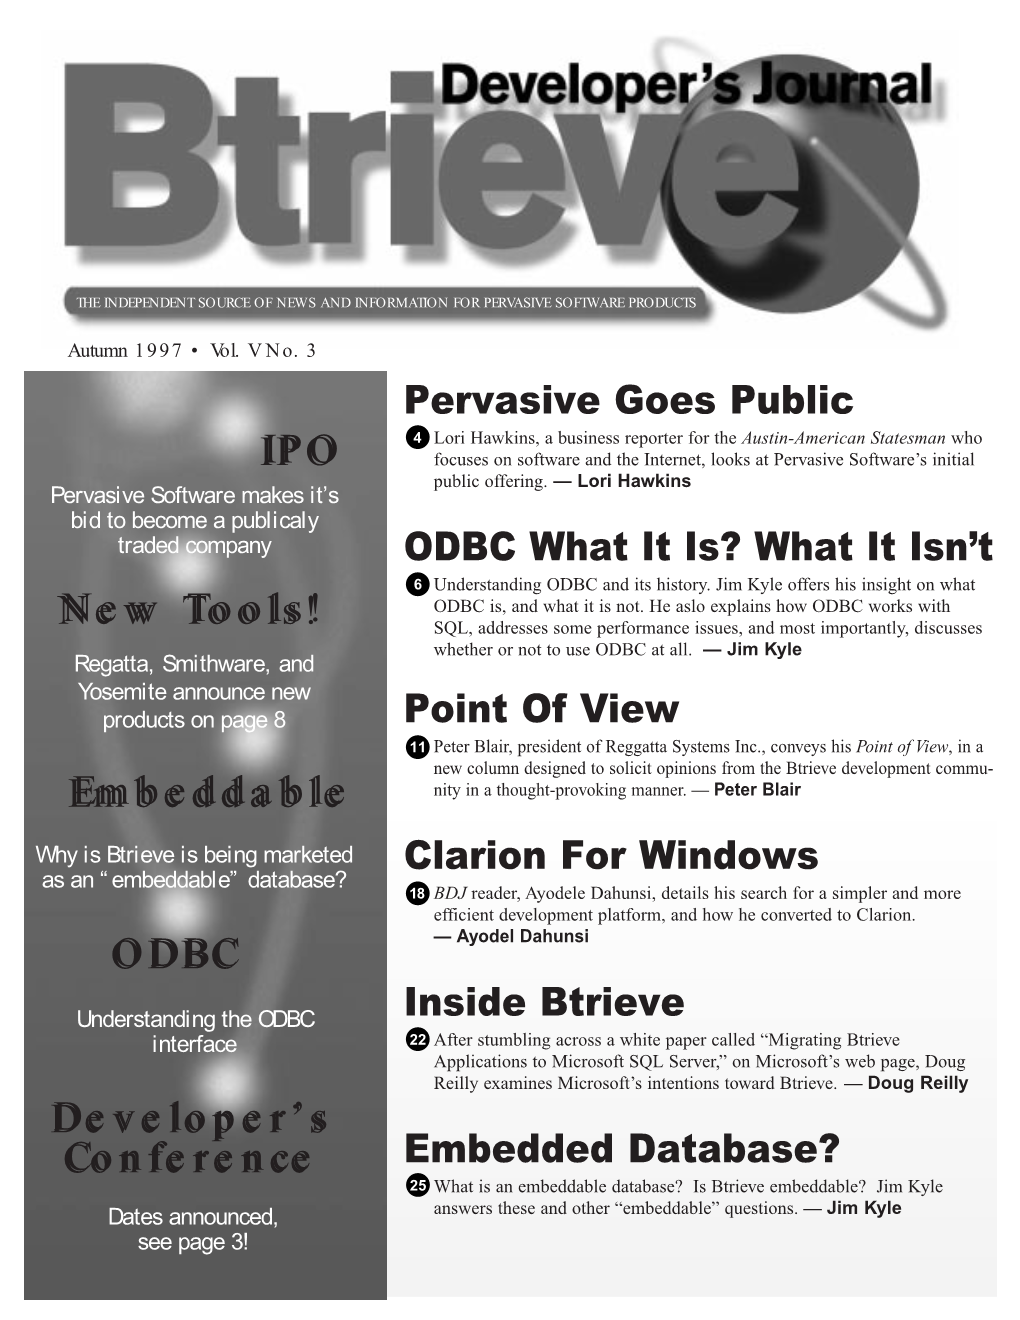 Btrieve Development Commu- Embeddableembeddable Nity in a Thought-Provoking Manner